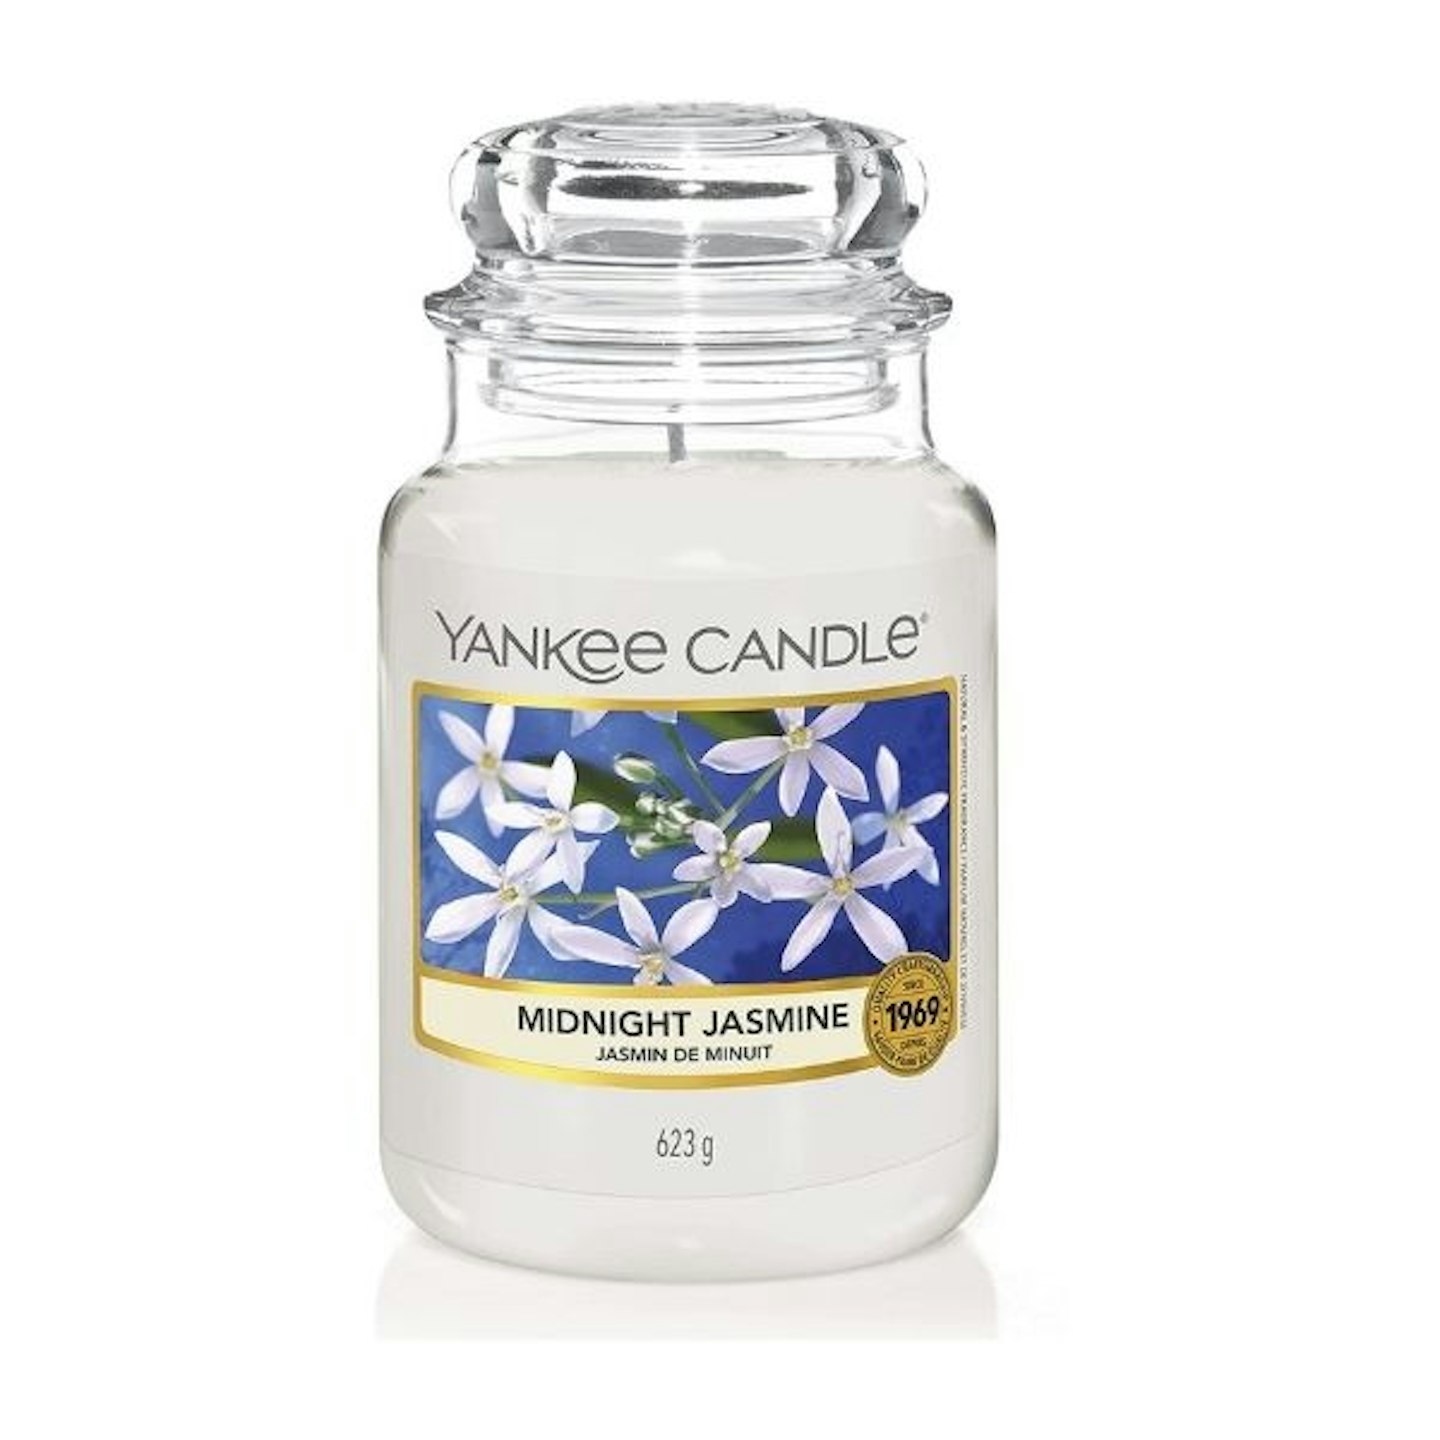 Yankee Candle Scented Candle